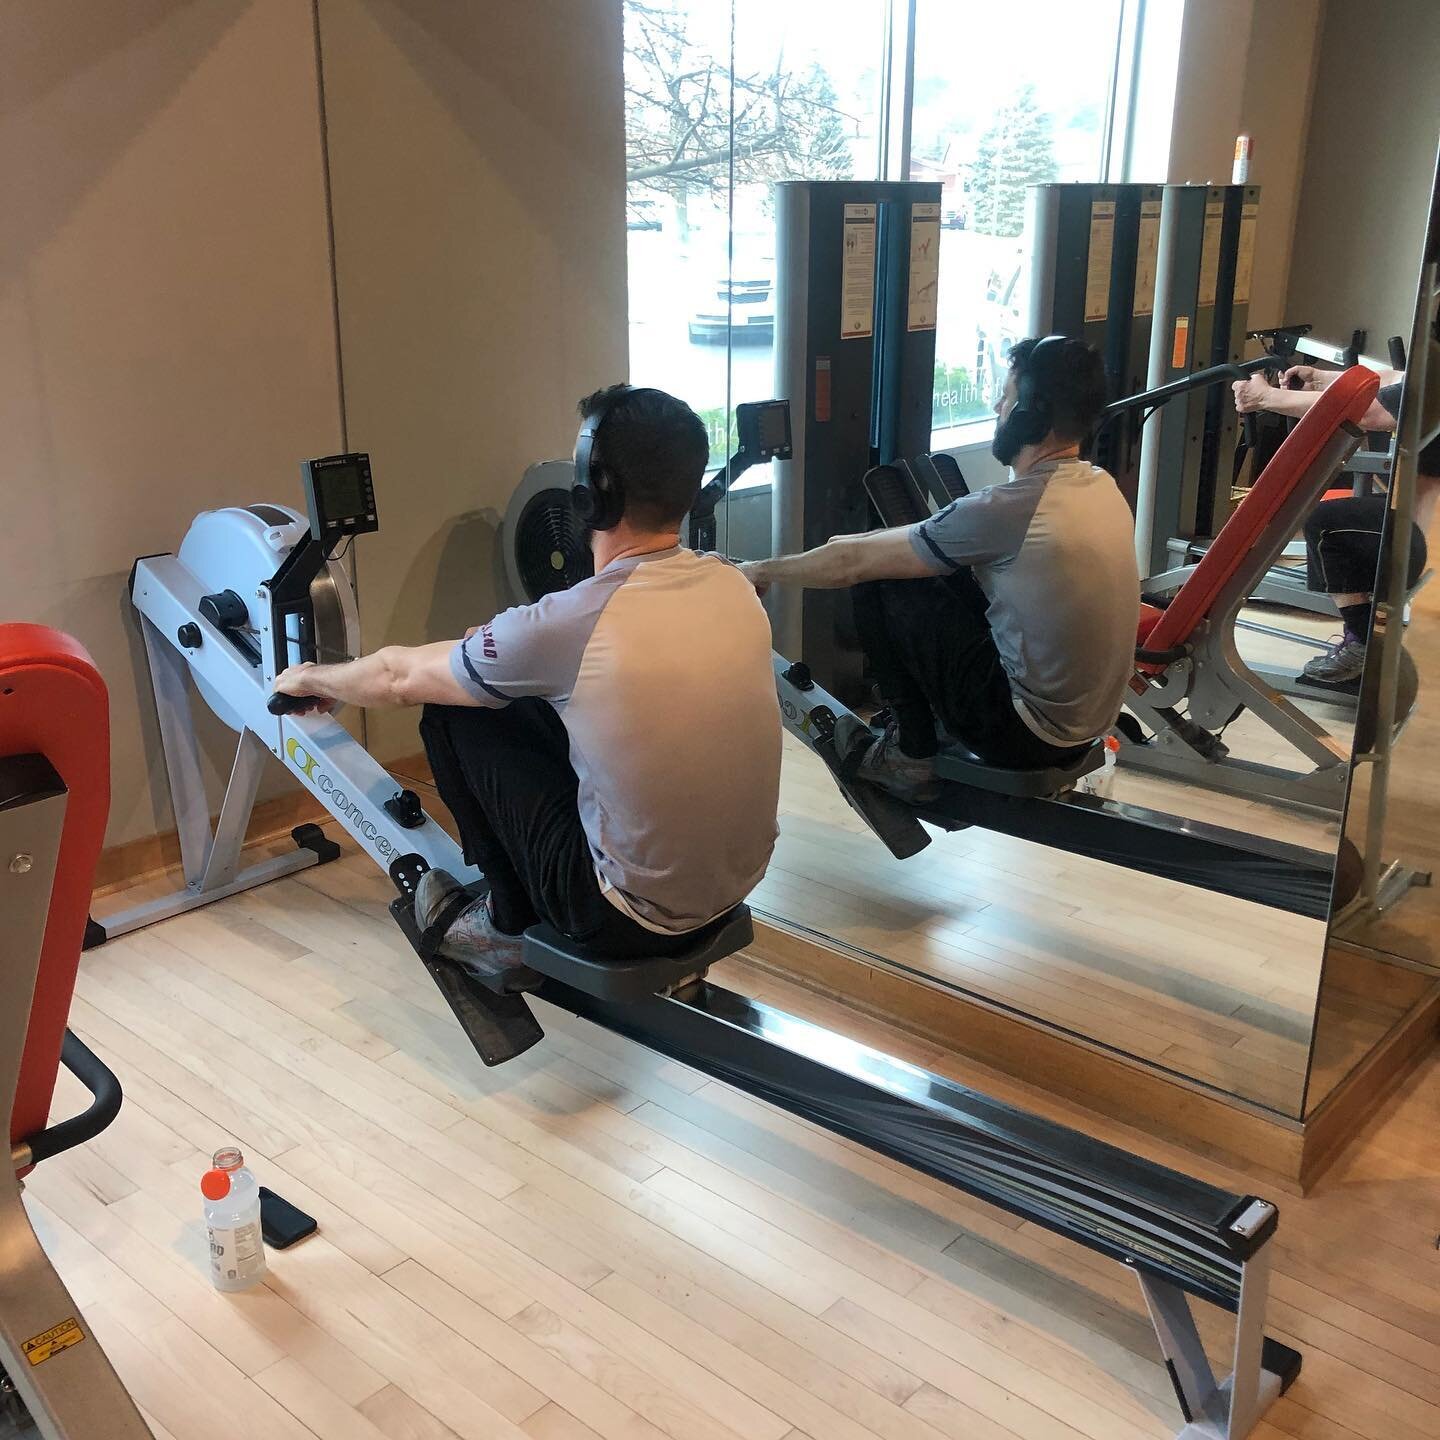 It&rsquo;s no secret that runners typically suffer from injuries associated with weak cores, poor posture, and restricted flexibility. Rowing with proper technique will help improve posture while developing functional flexibility, making you an overa